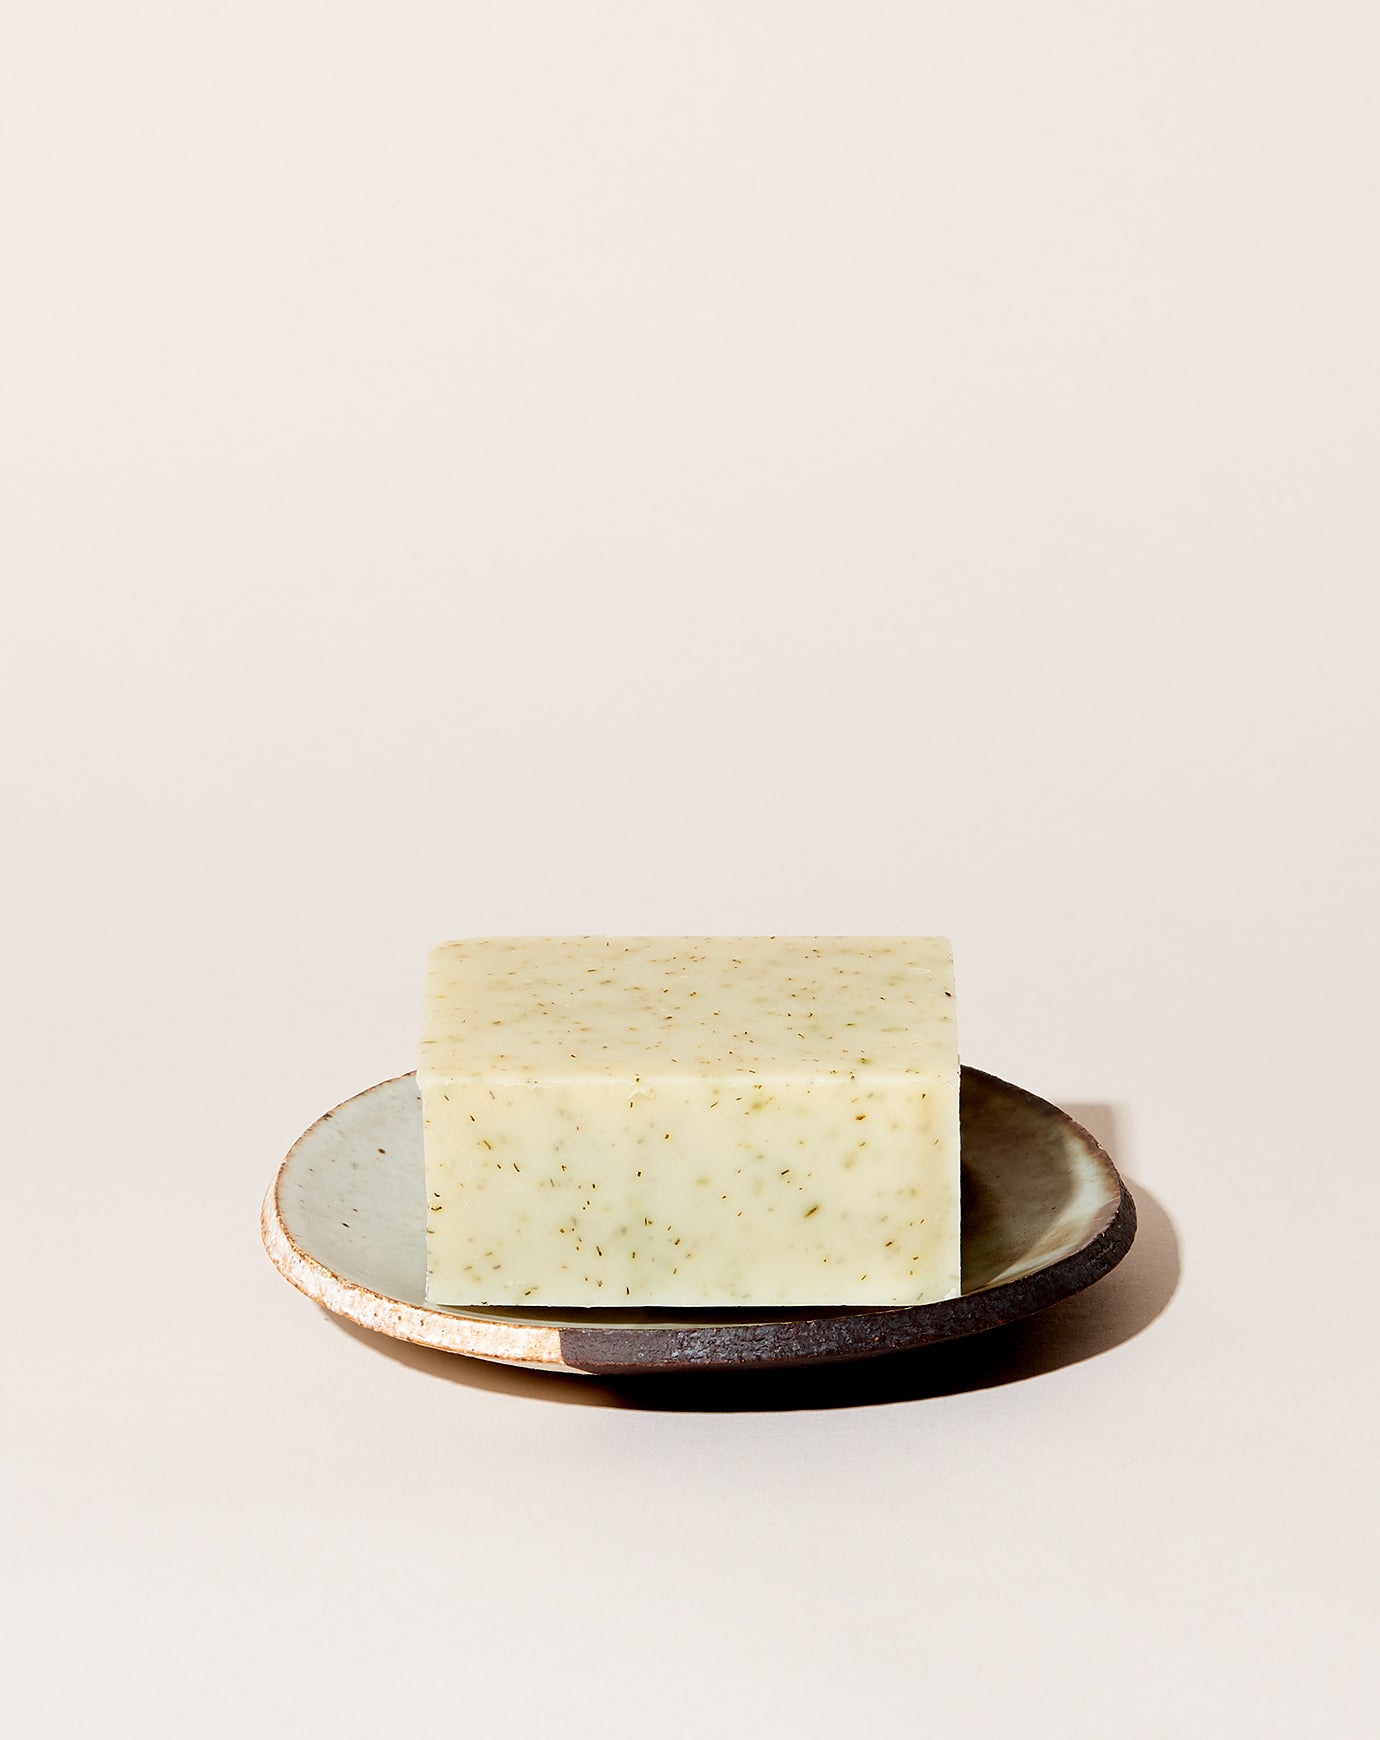 Saipua Soap in Clary Sage with Dill